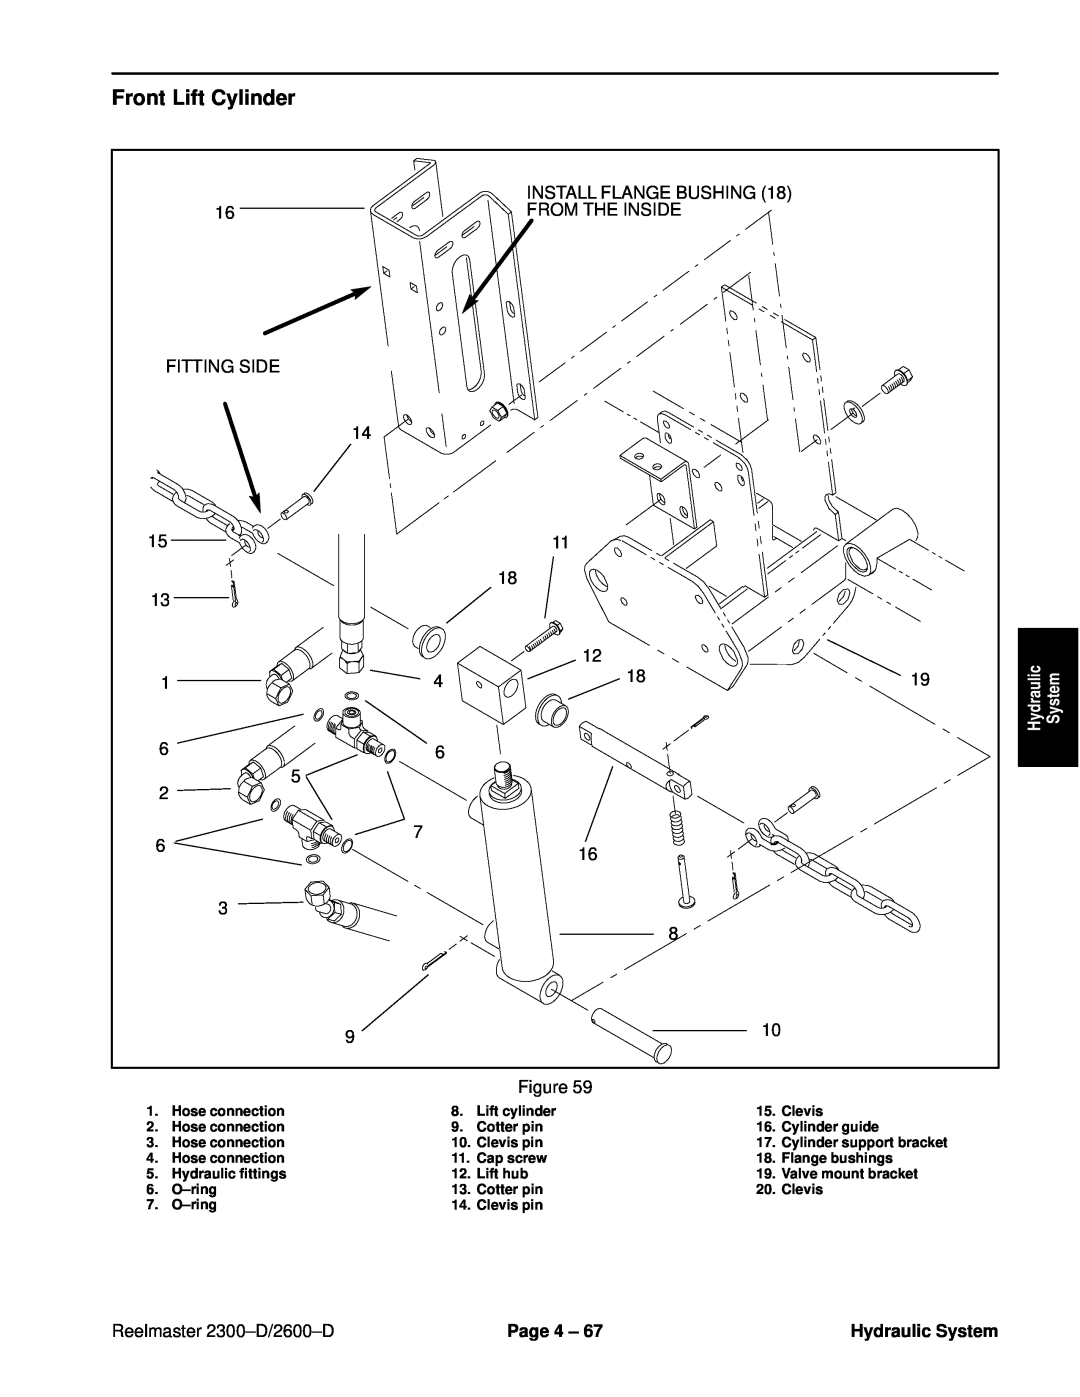 Toro 2600D, 2300-D service manual Front Lift Cylinder, Reelmaster 2300±D/2600±D, Page 4 ±, Hydraulic System 